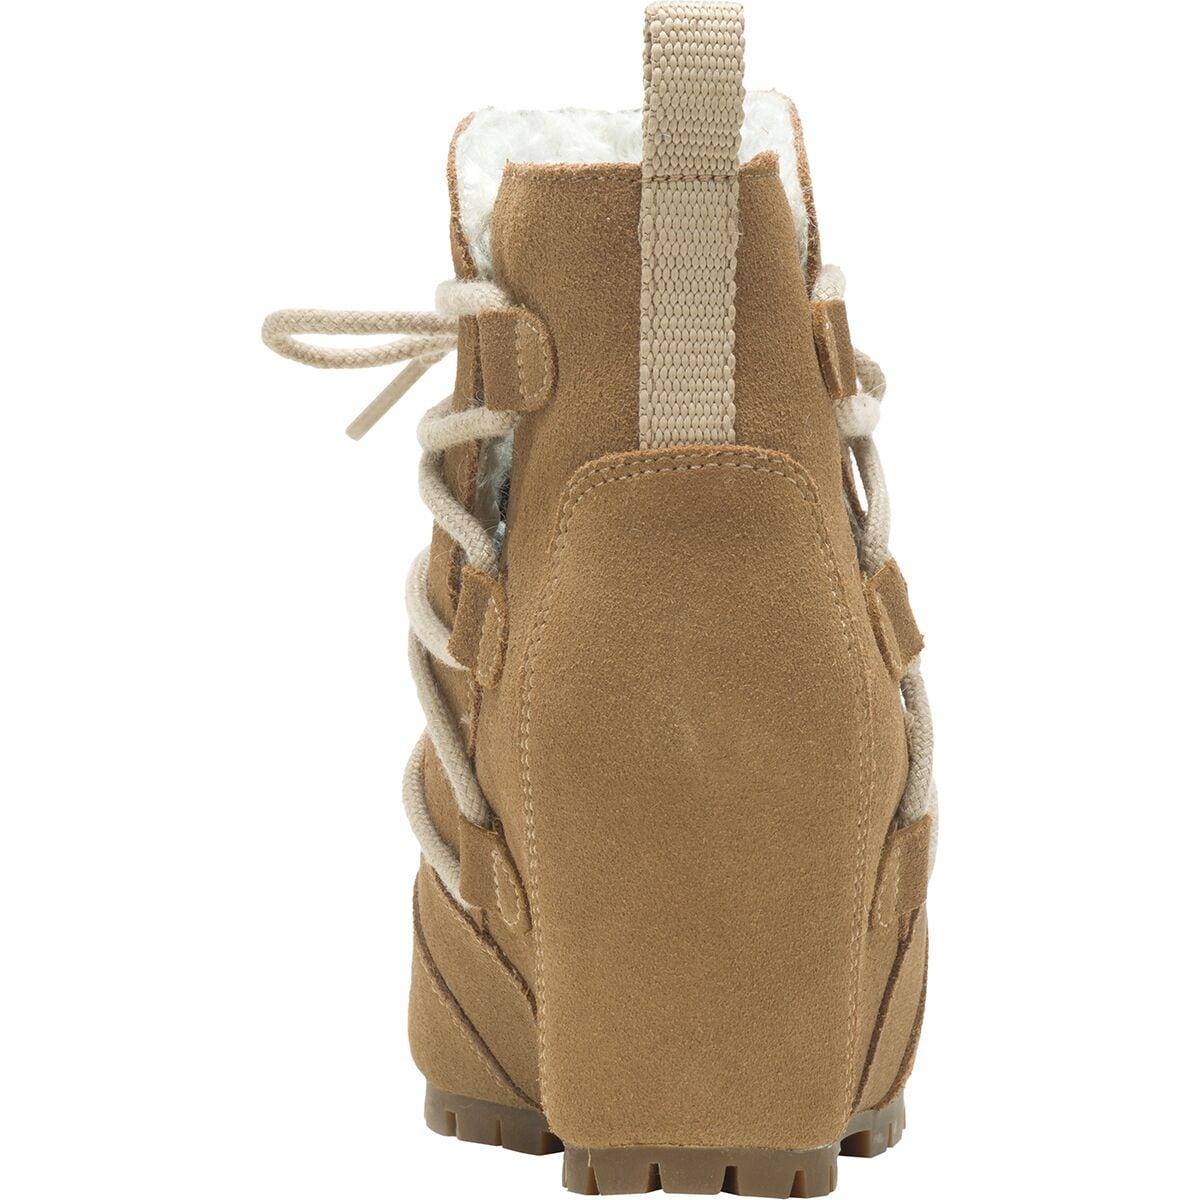 Moab Wedge Polar Boot - The Shoe CollectiveMerrell